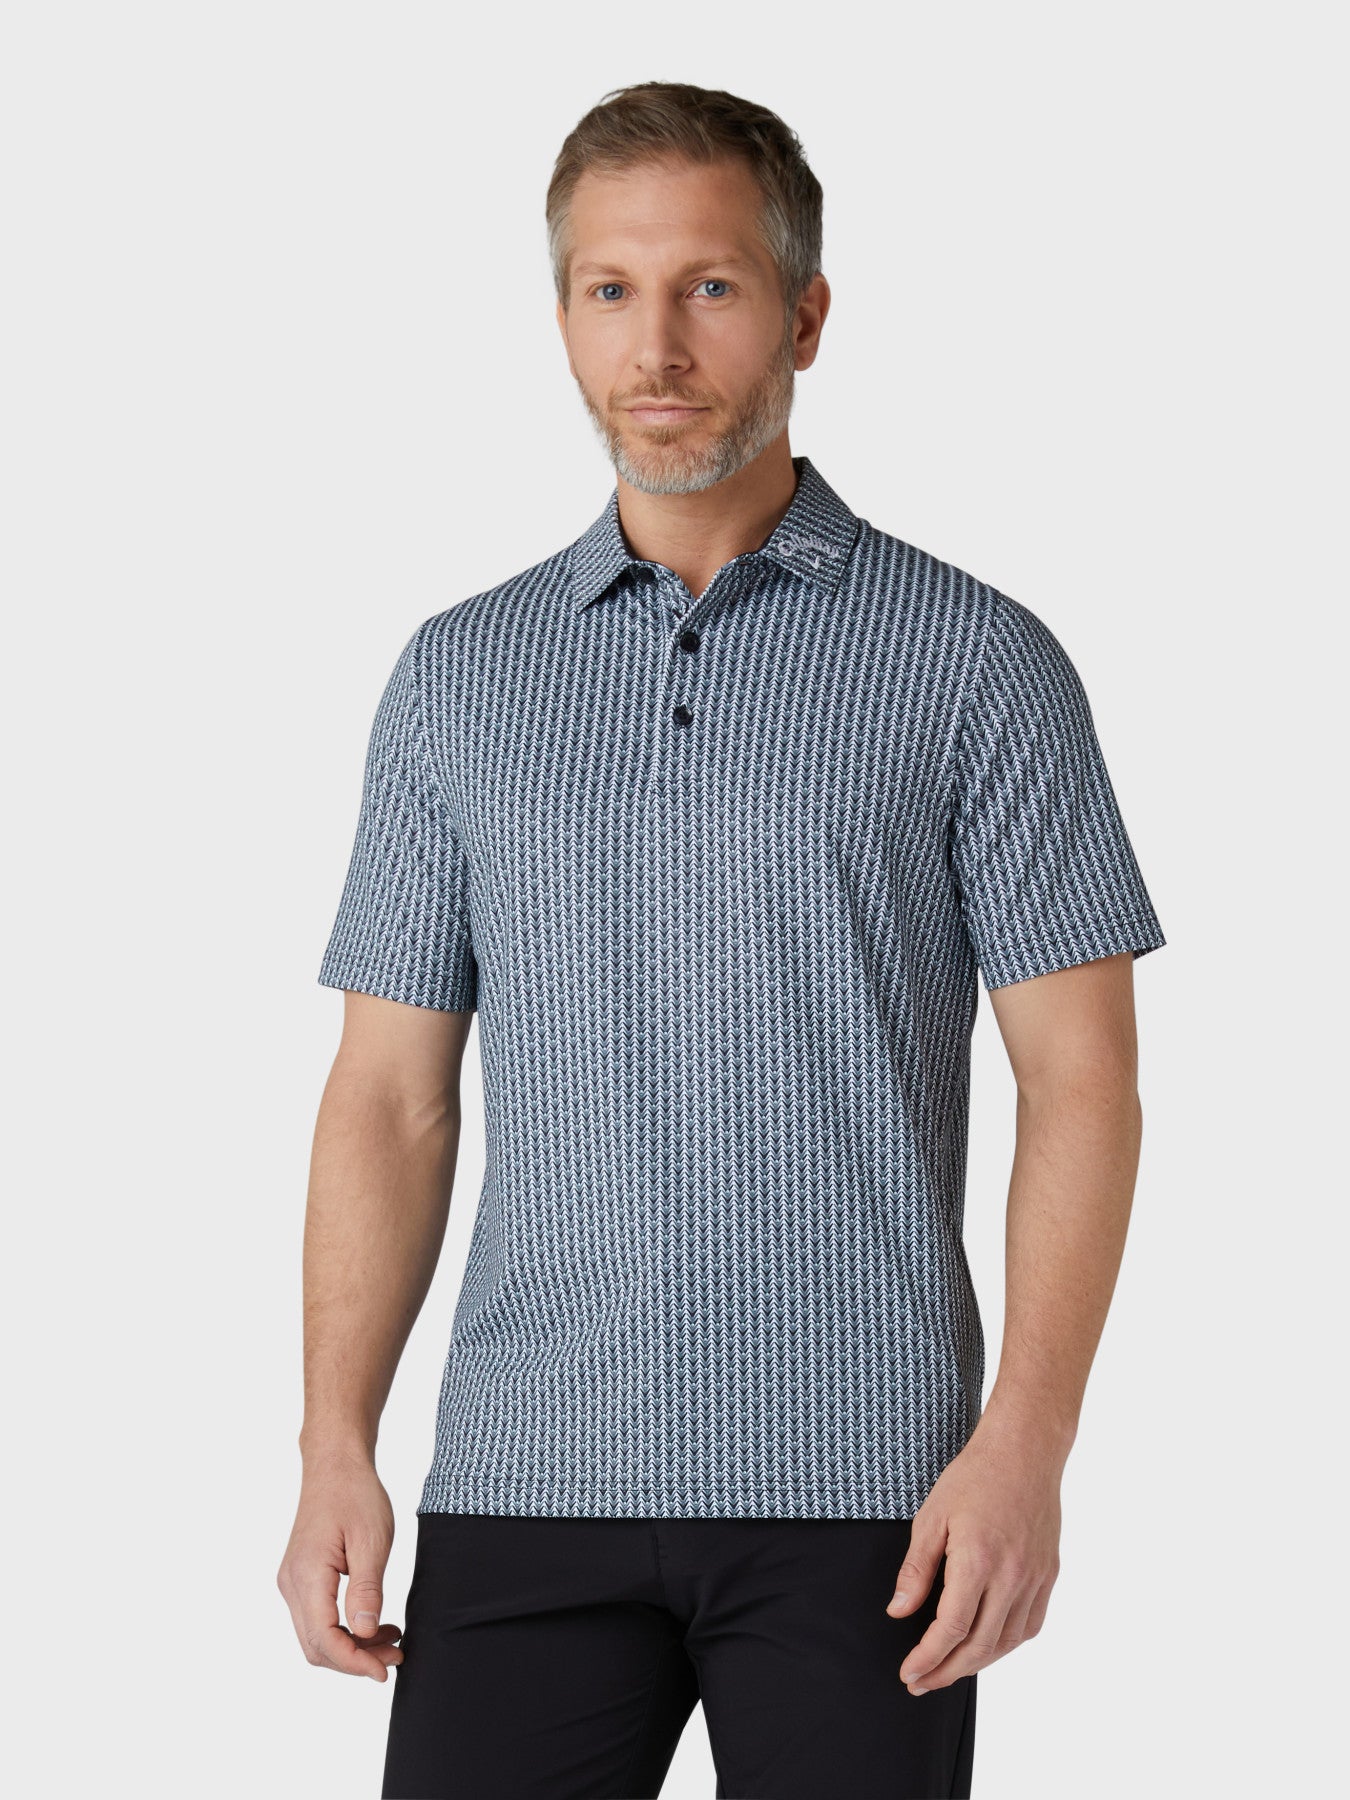 View Mens Chev And Ball All Over Print Polo In Caviar Caviar M information